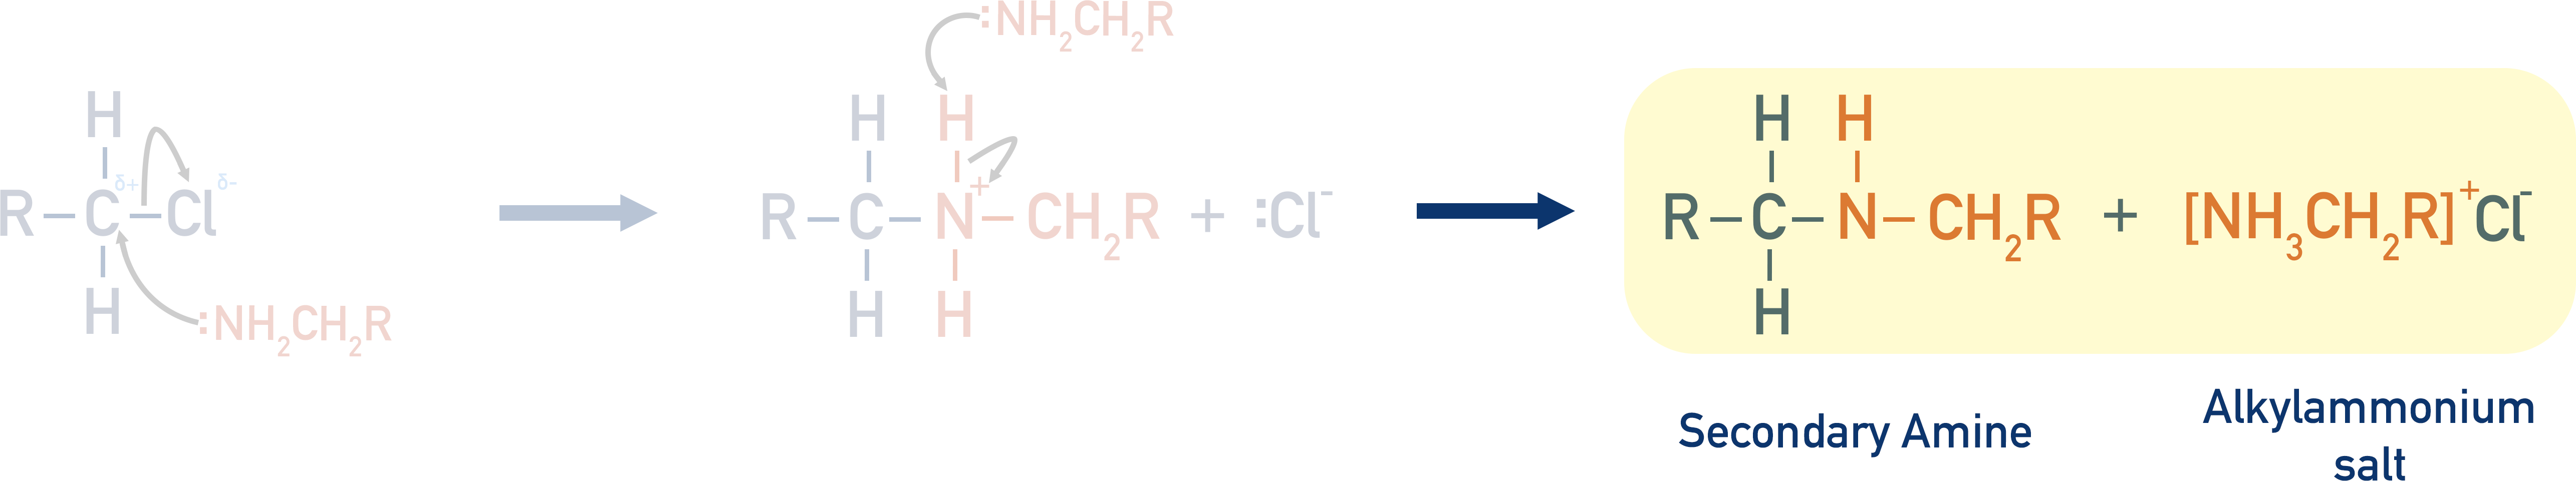 secondary amine mechanism from halogenoalkane and primary amine products